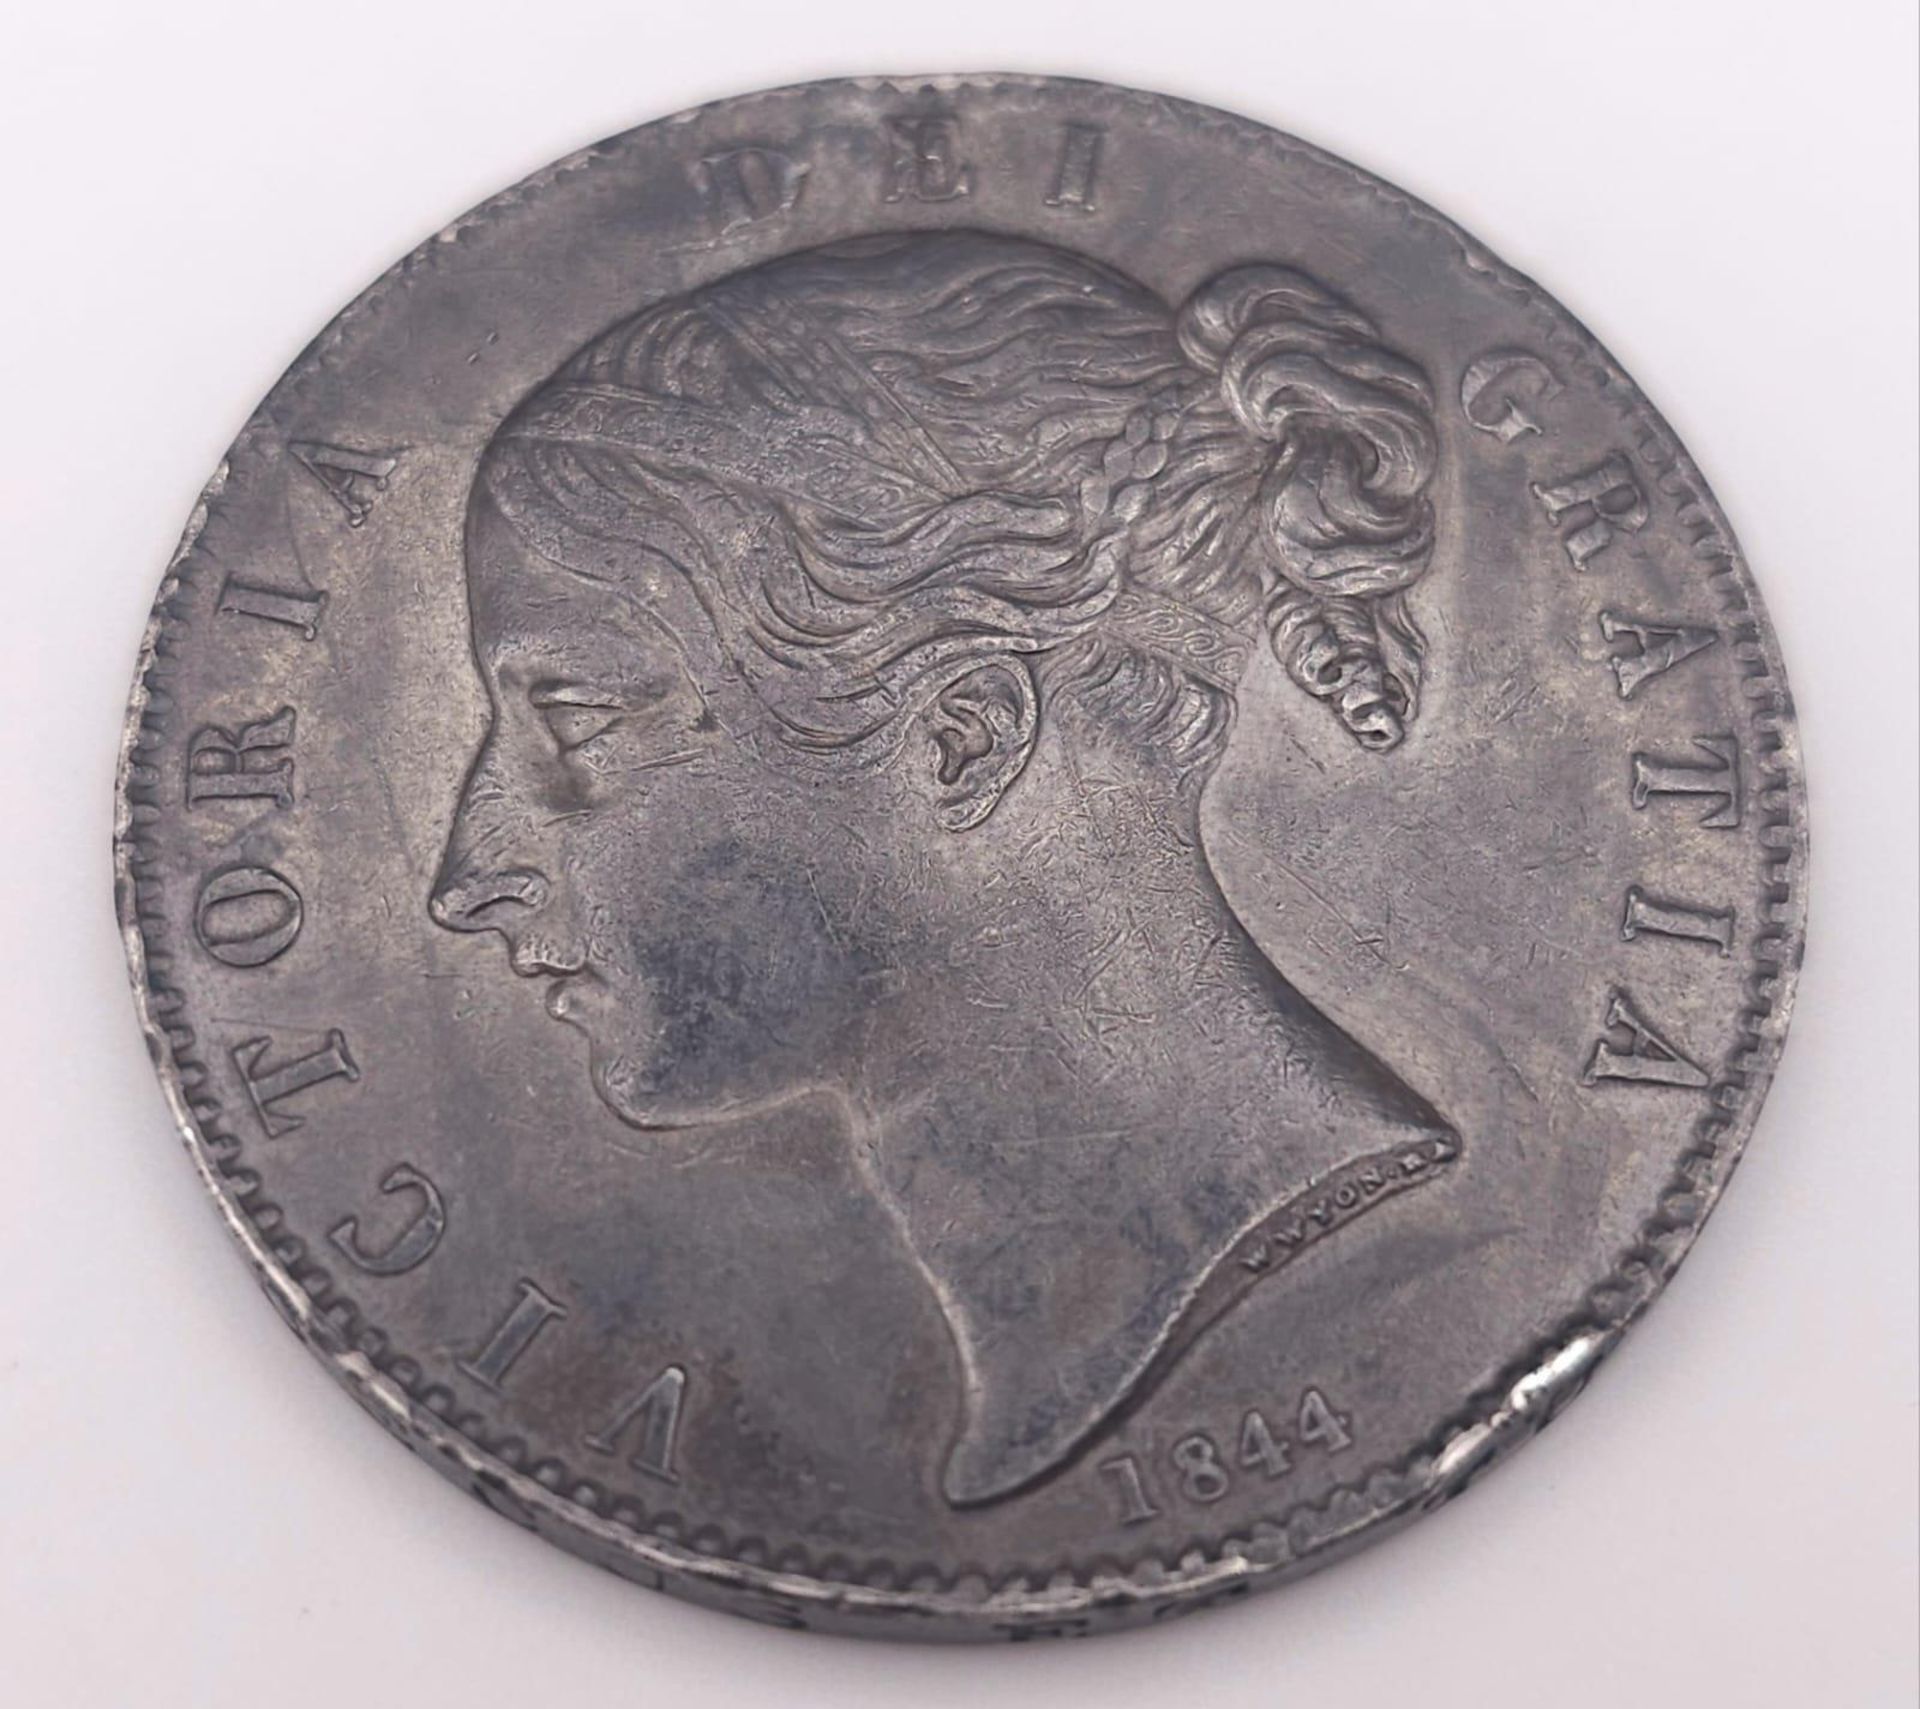 Withdrawn - An 1844 Queen Victoria (Young Head) Silver Crown. High grade but please see photos. - Image 4 of 10